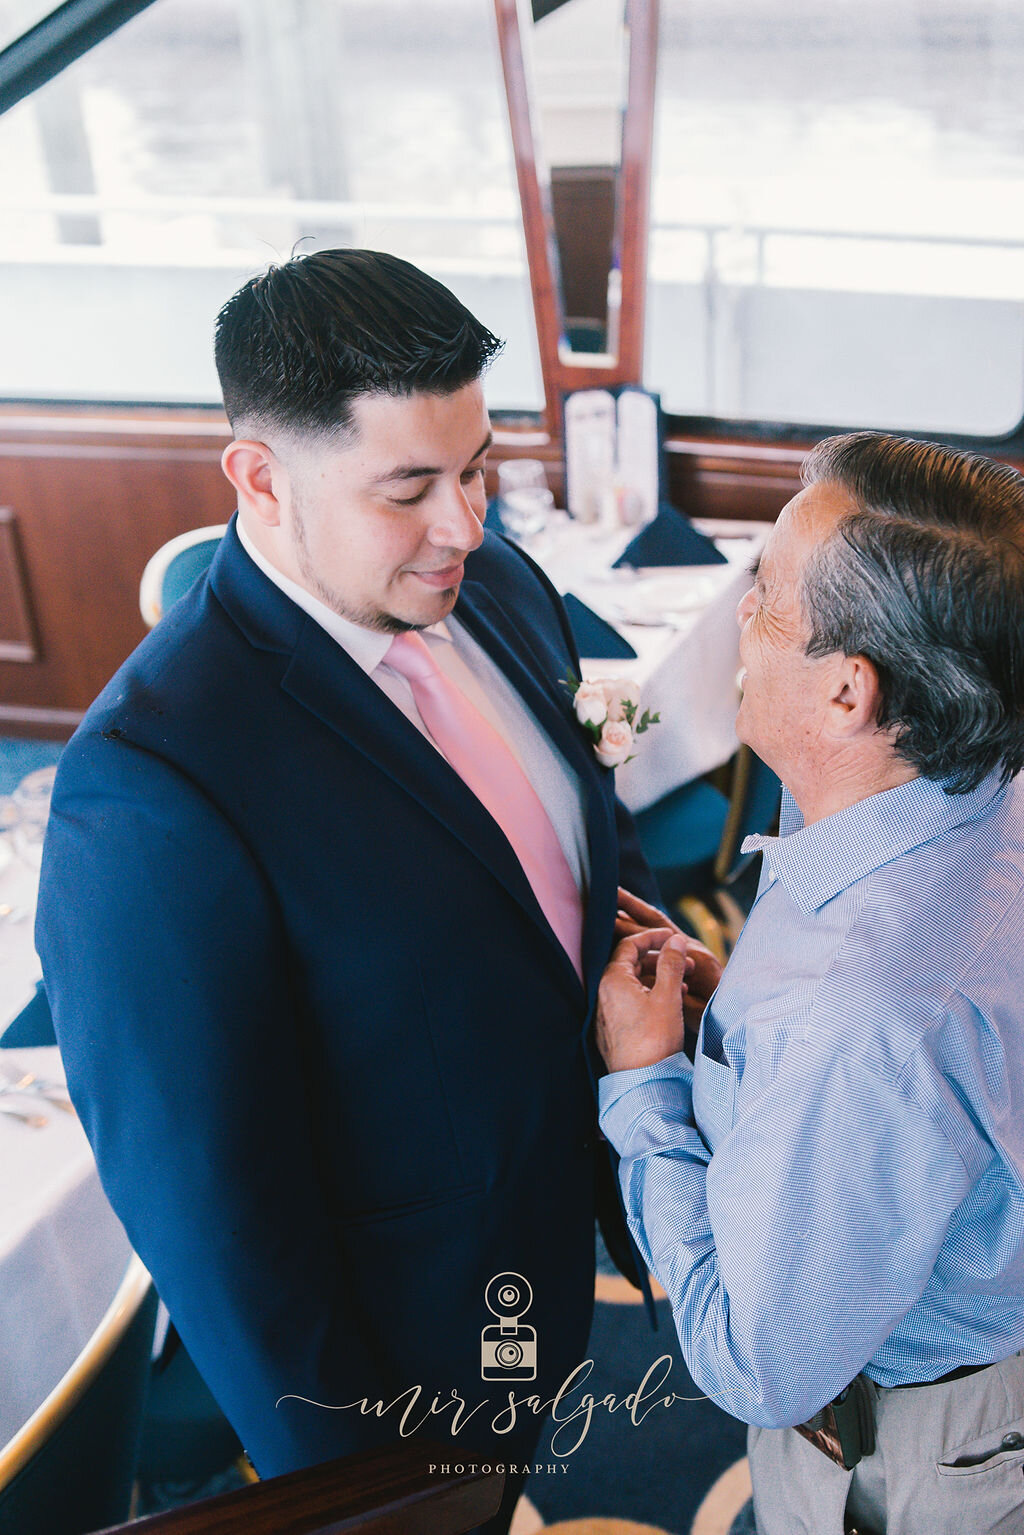 father-of-the-groom-pictures, groom-navy-and-pink-suit, getting-ready-groom-photos